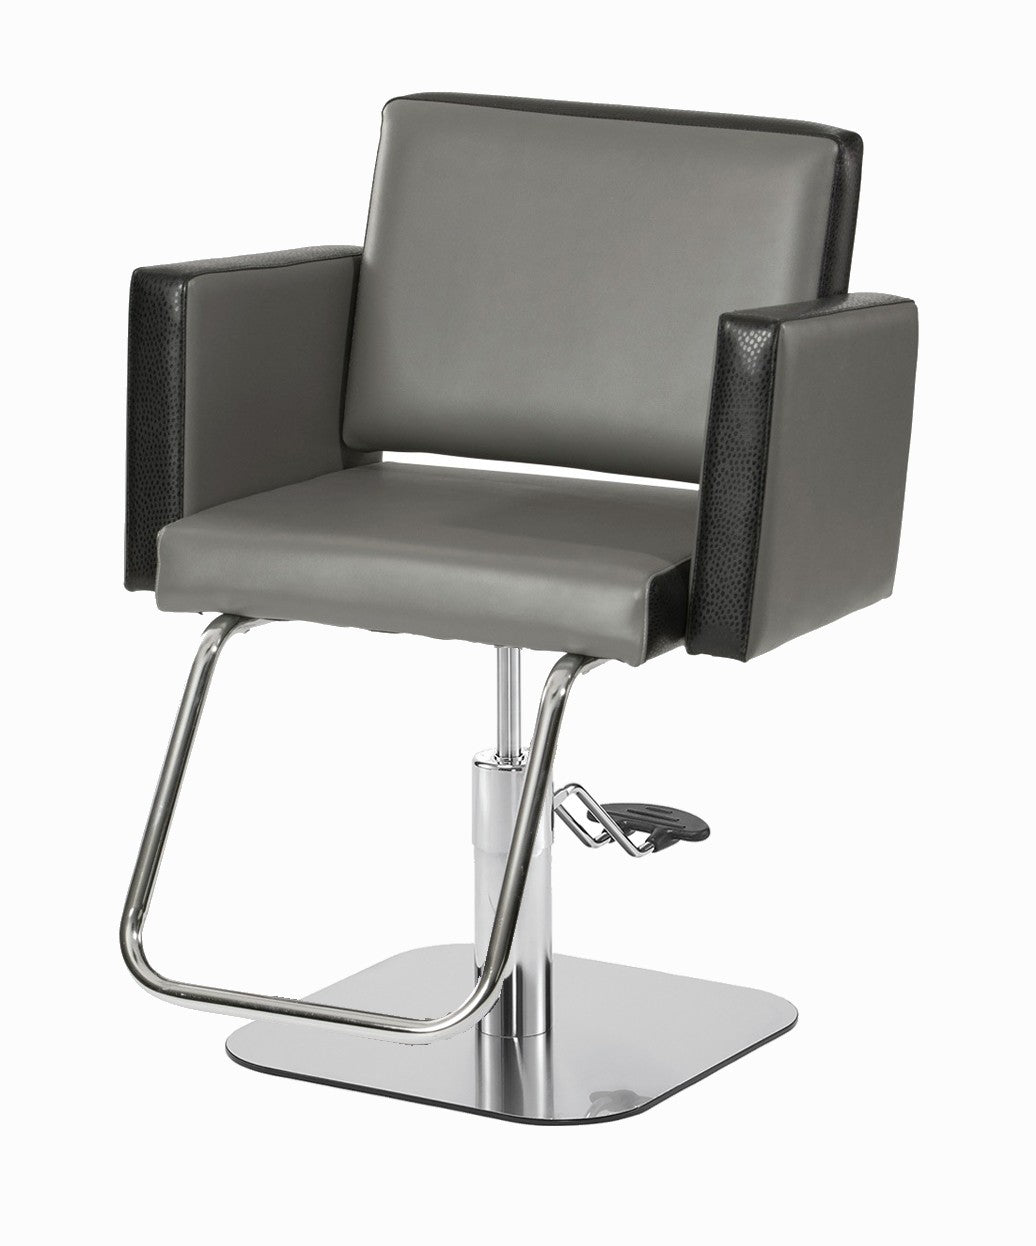 Pibbs 3406 Cosmo Styling Chair